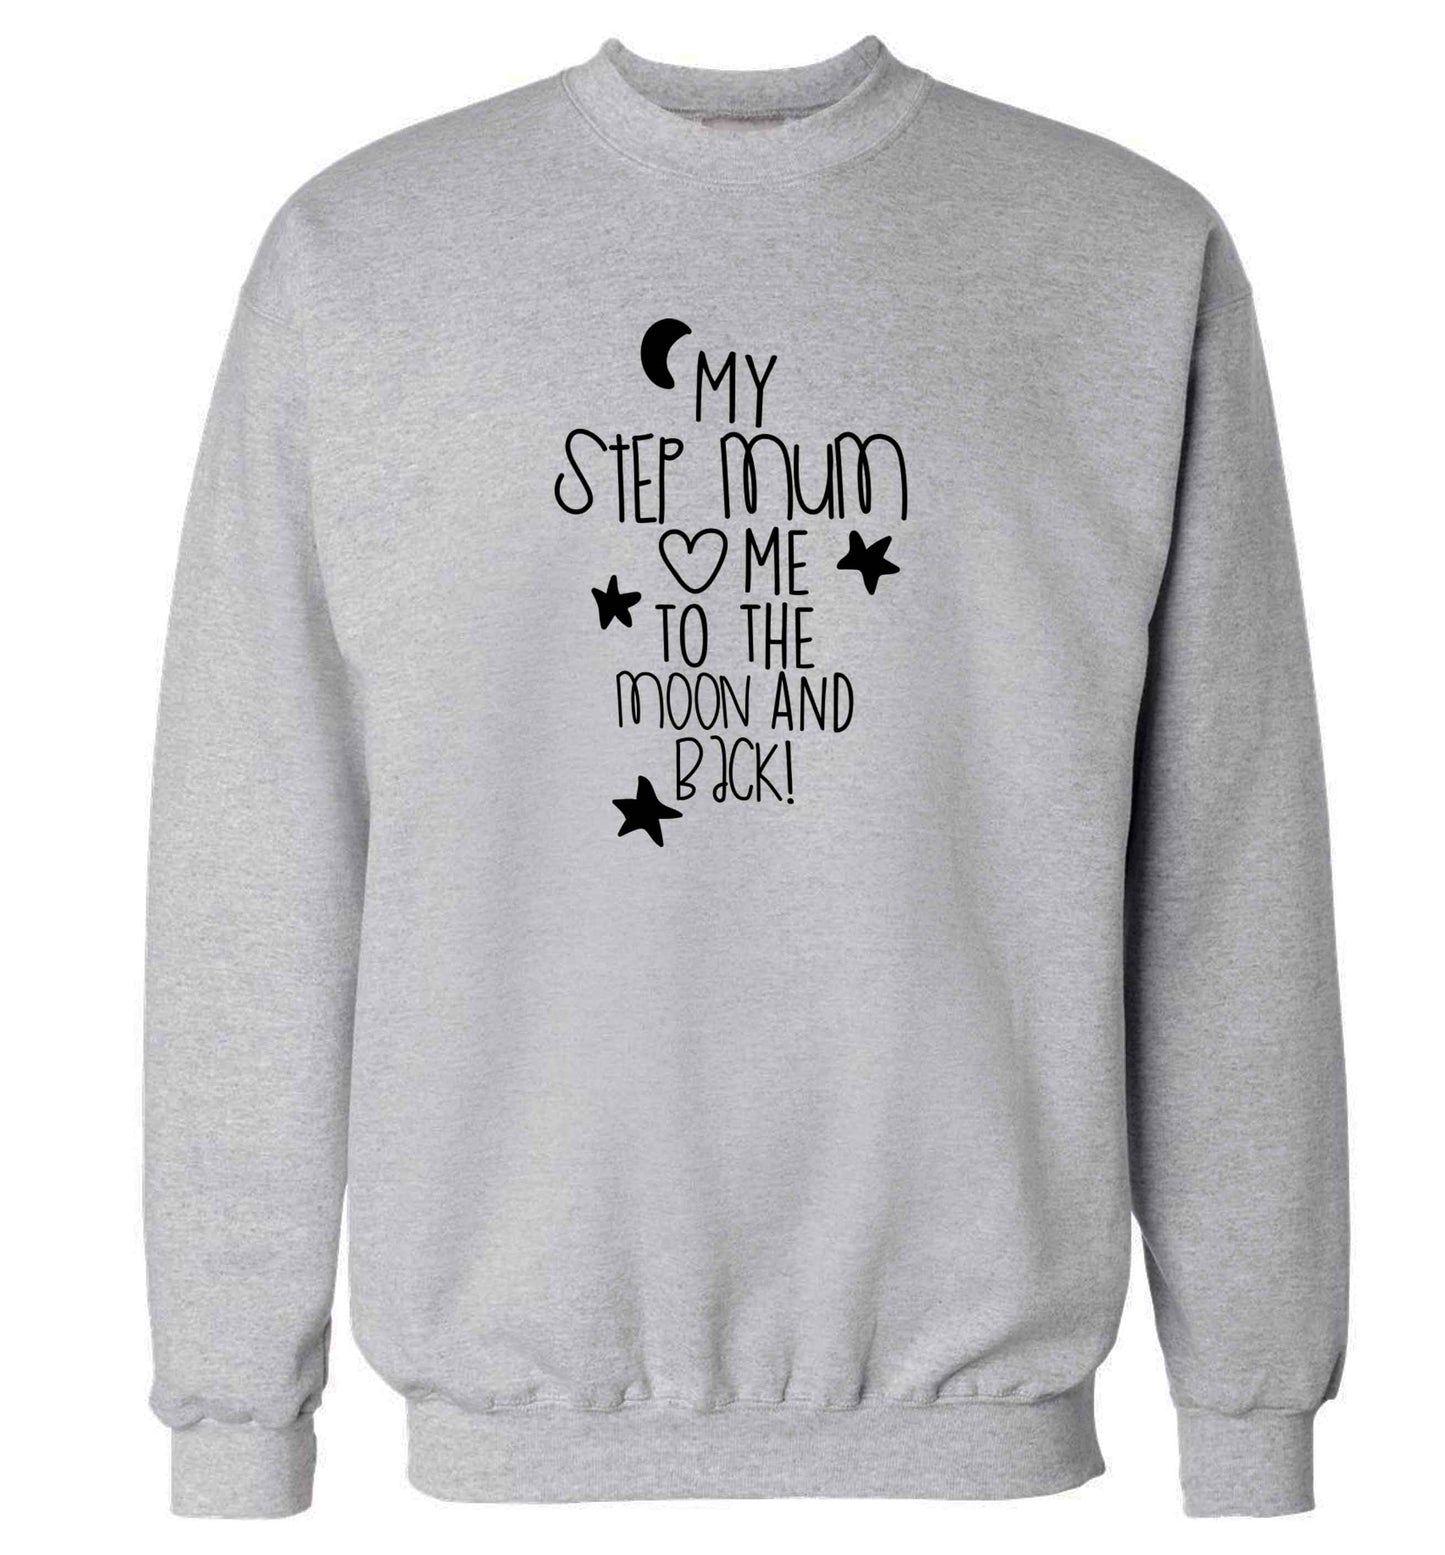 My step-mum loves me to the moon and back adult's unisex grey sweater 2XL